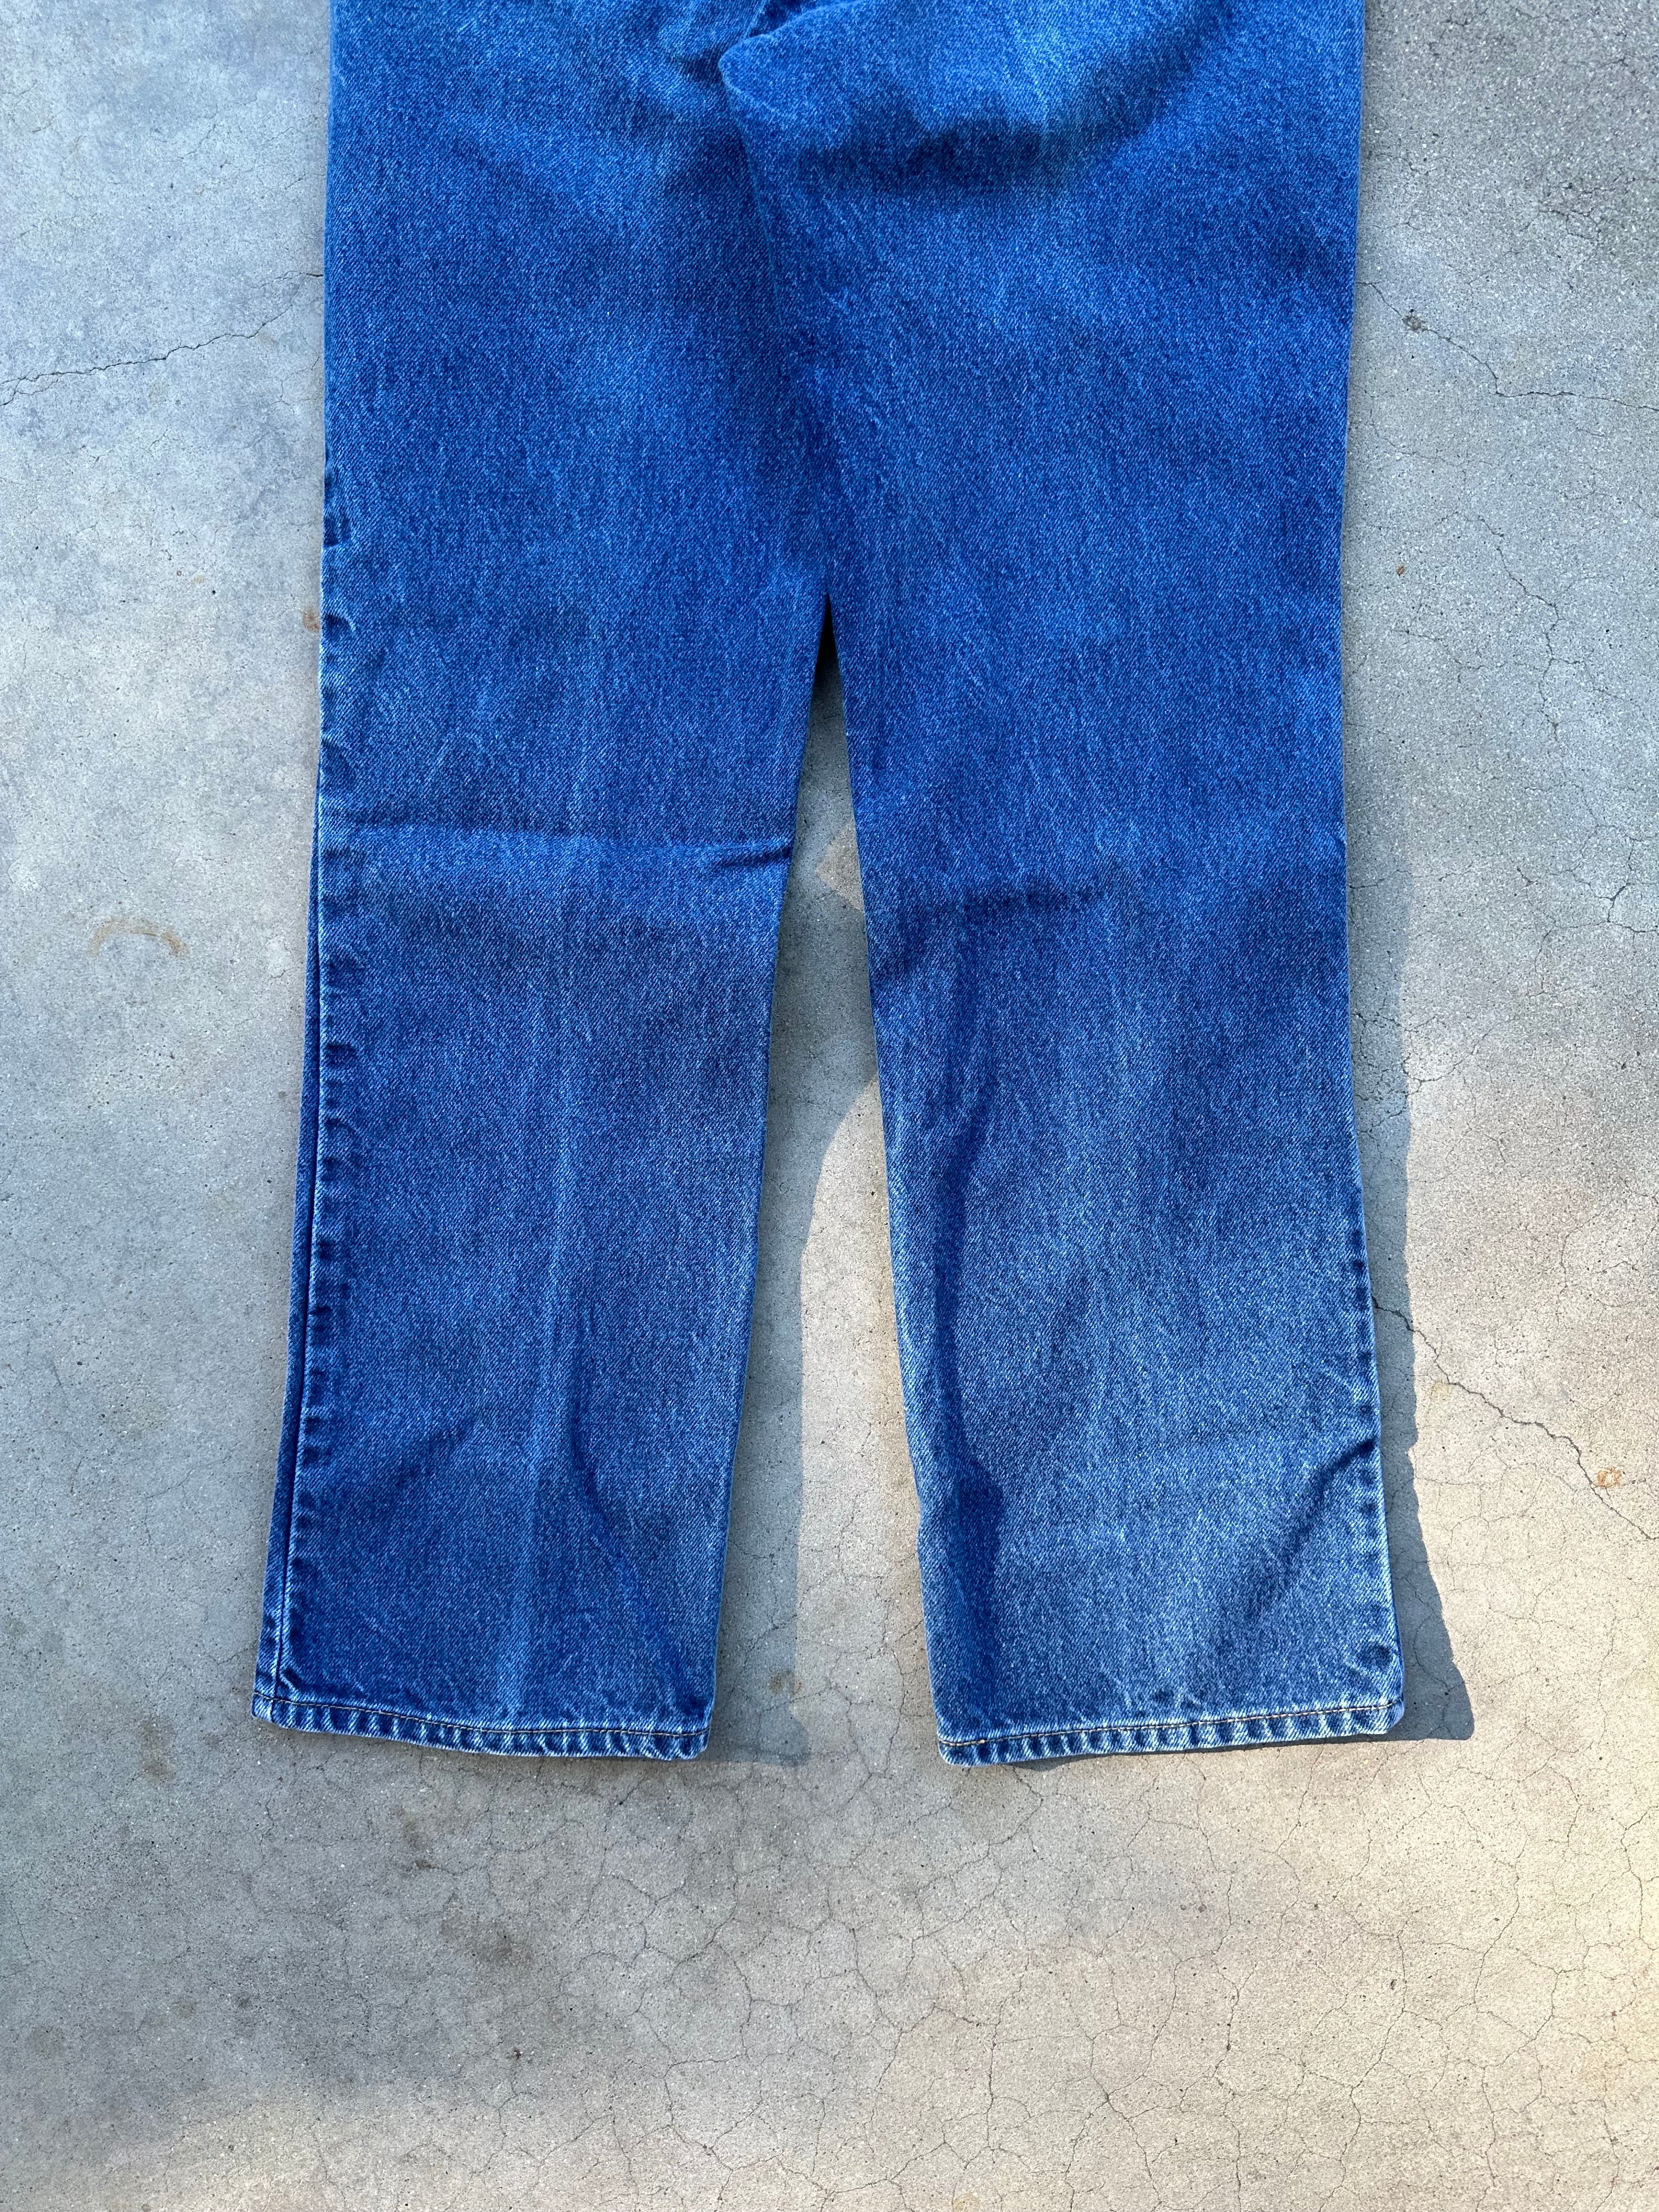 1996 Levi’s 517 Flare Jeans (30"x29")